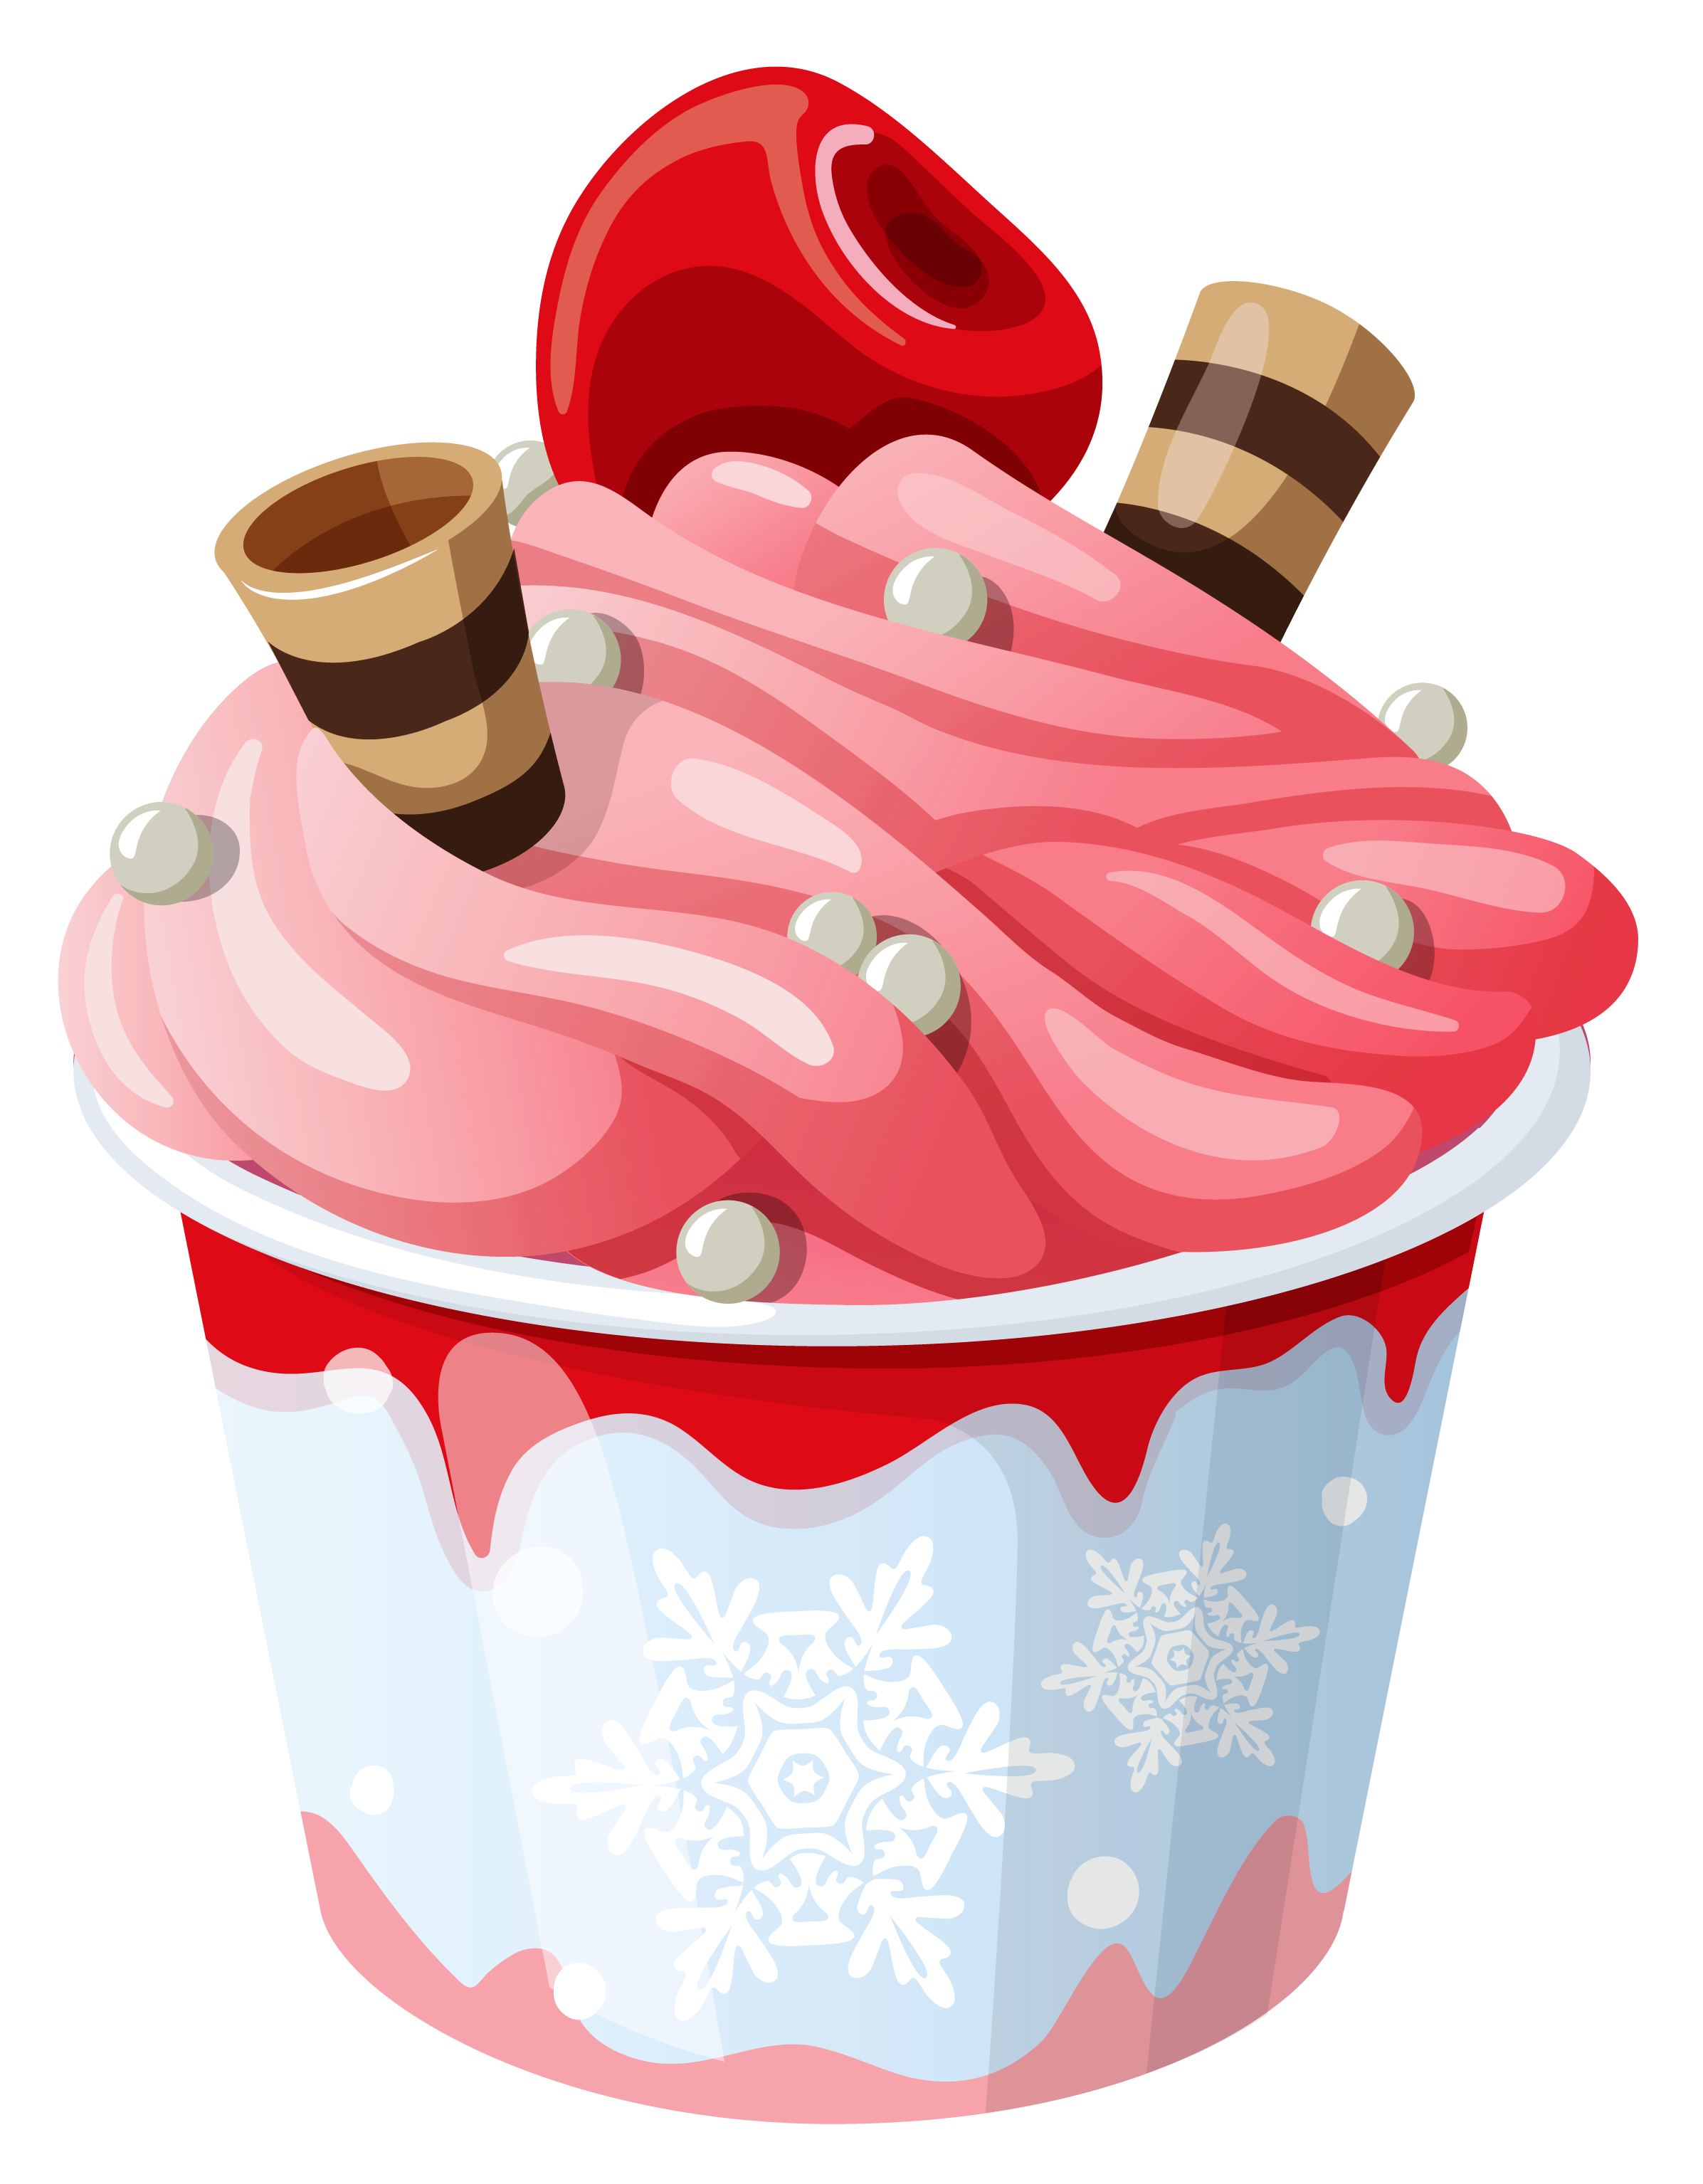 Ice cream cup png. Cupcakes clipart unicorn